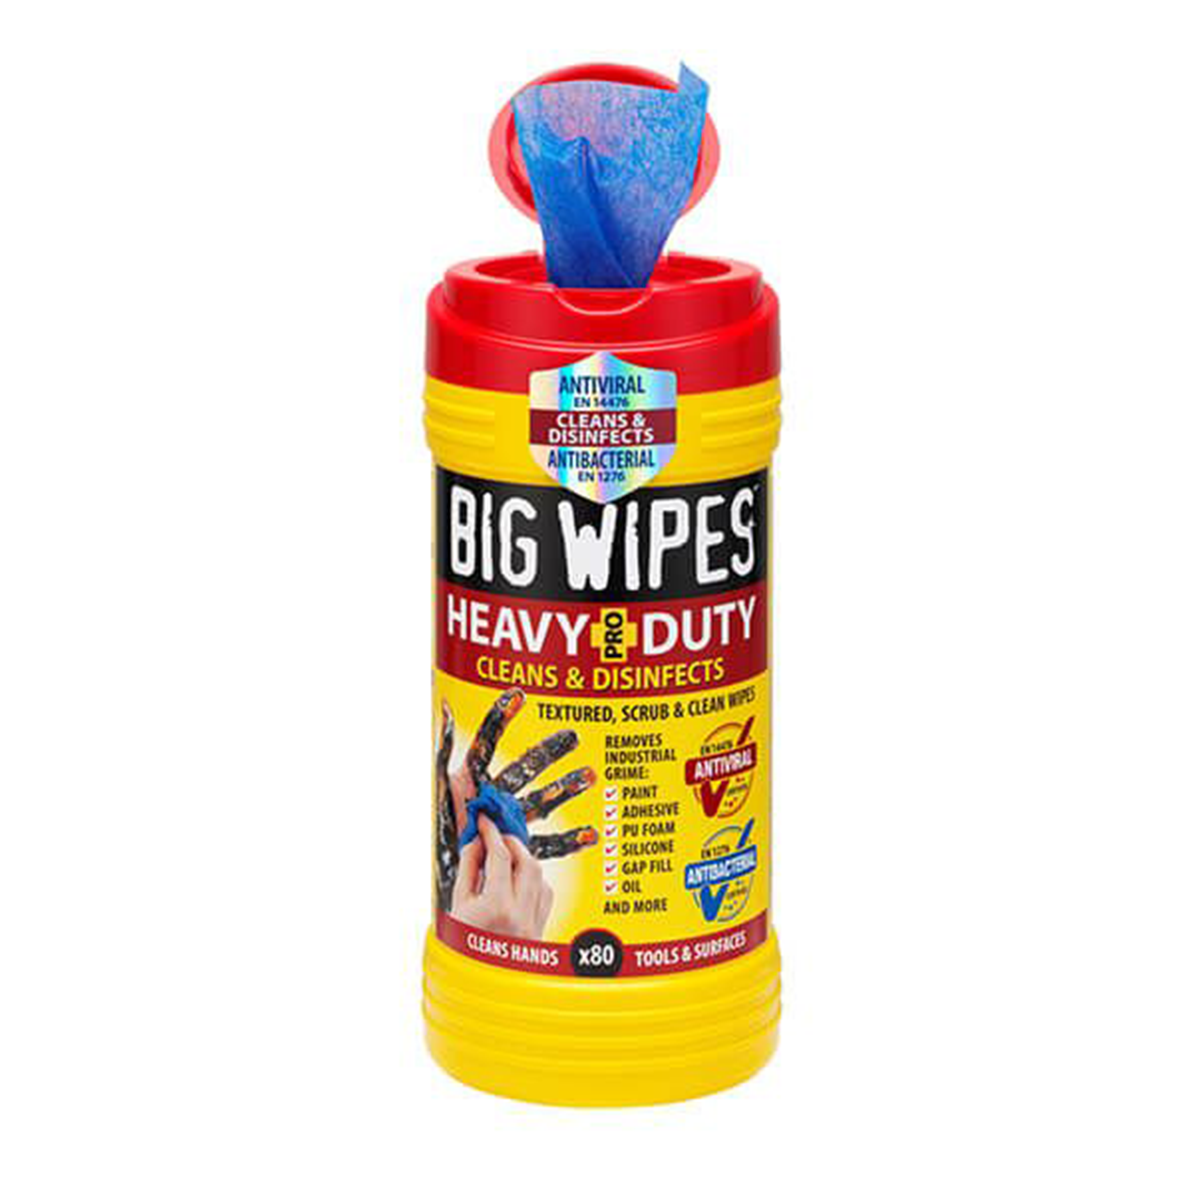 Big Wipes Heavy Duty Pro+ Antiviral - RED TOP